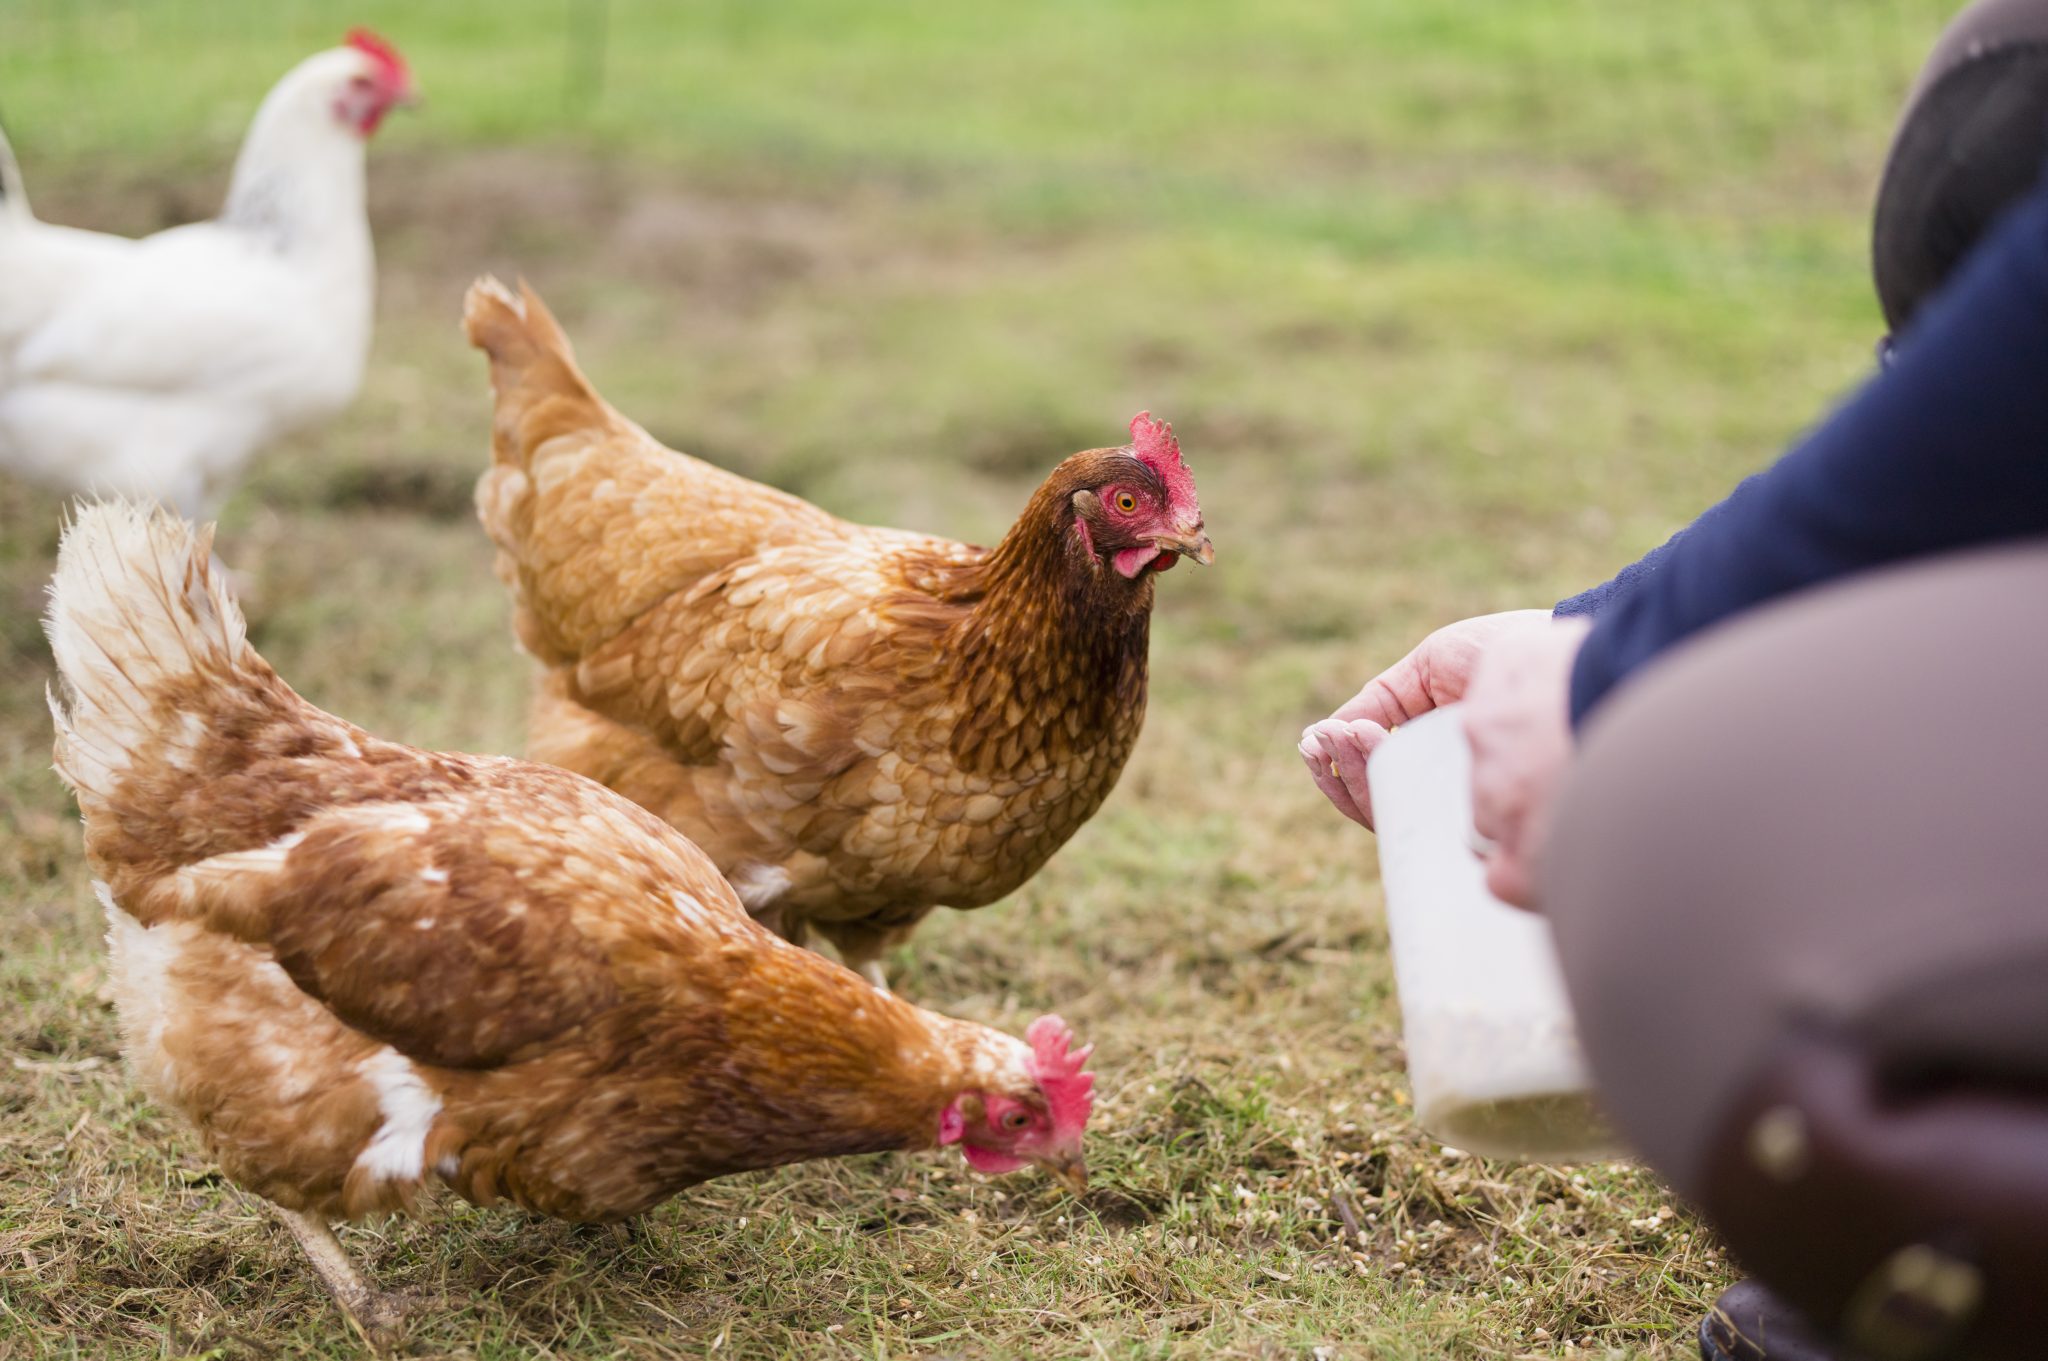 Nutritional Requirements Of Chickens